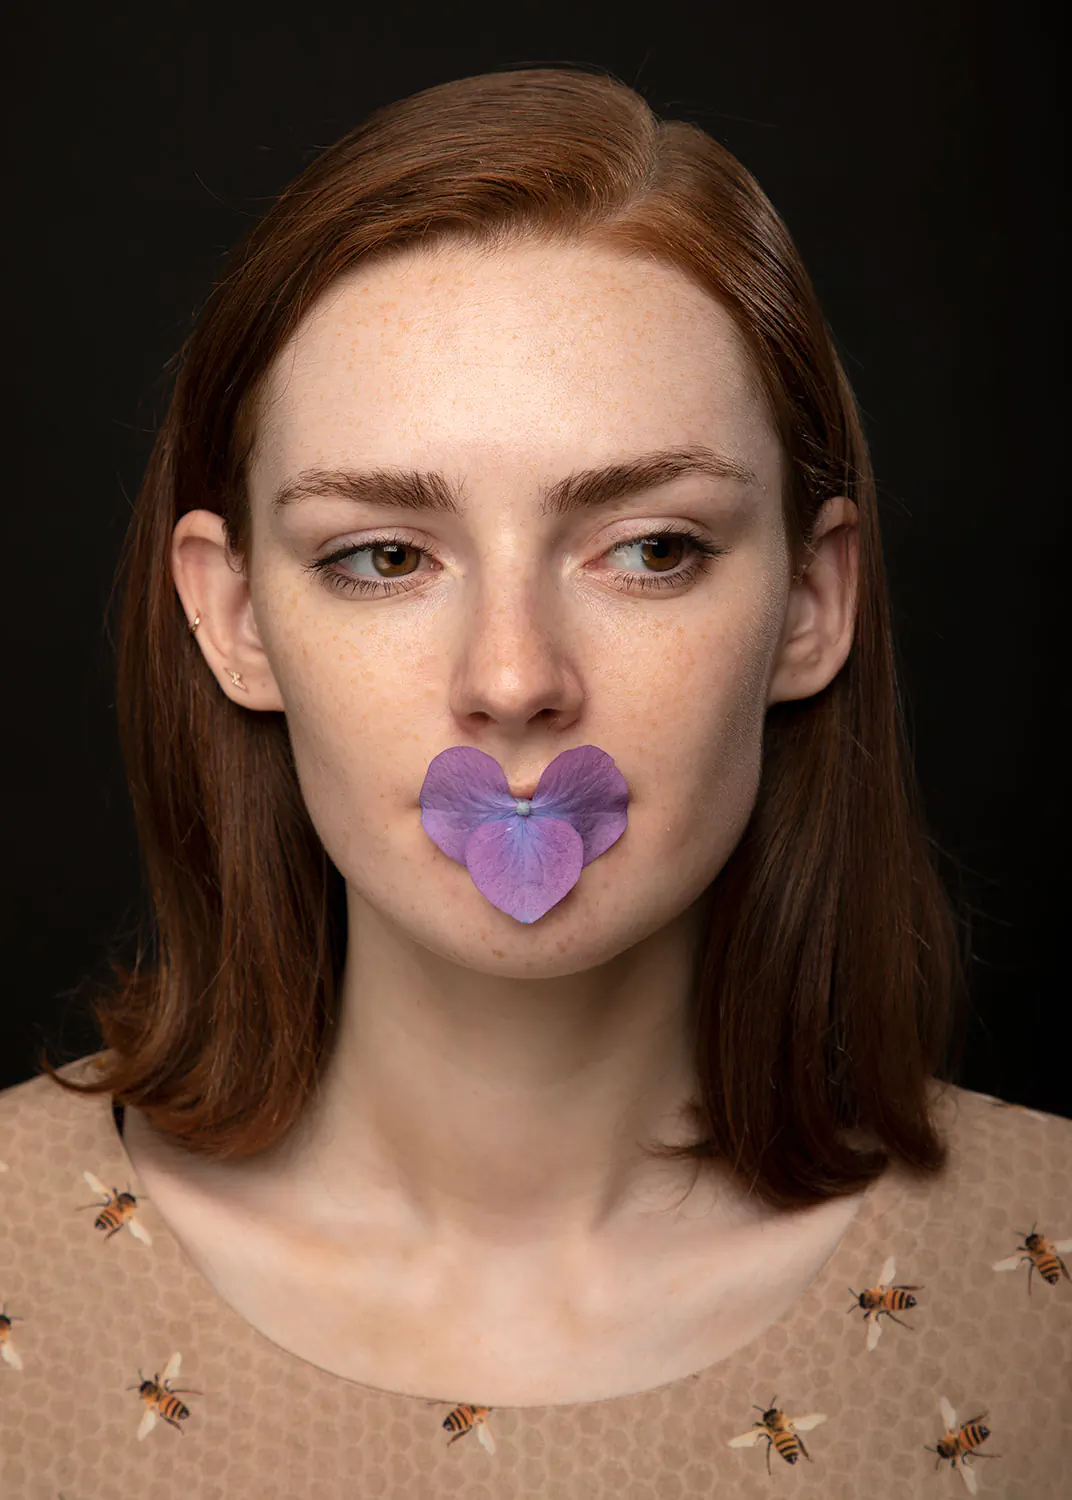 Artistic portrait of a woman with purple hydrangea flowers in mouth